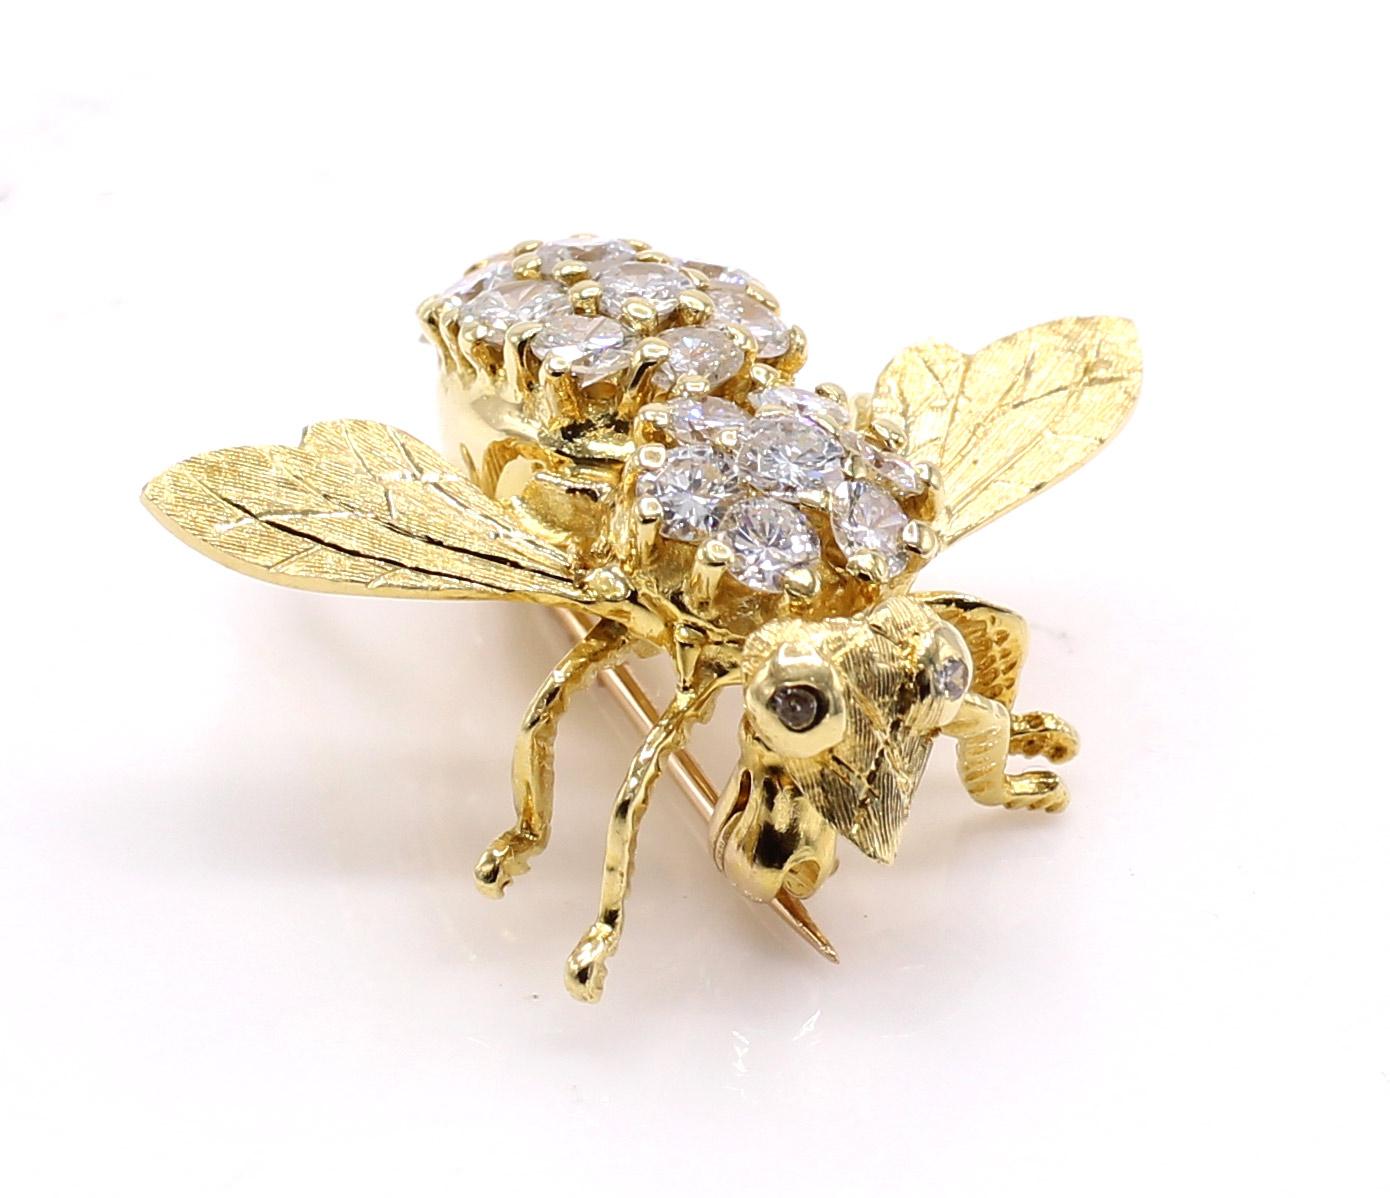 Beautifully designed and perfectly handcrafted 18 karat insect brooch. Set with 19 perfectly matched white bright and lively round brilliant cut diamonds with an approximate total diamond weight of 2.20 carats. The wings are finely and realistically